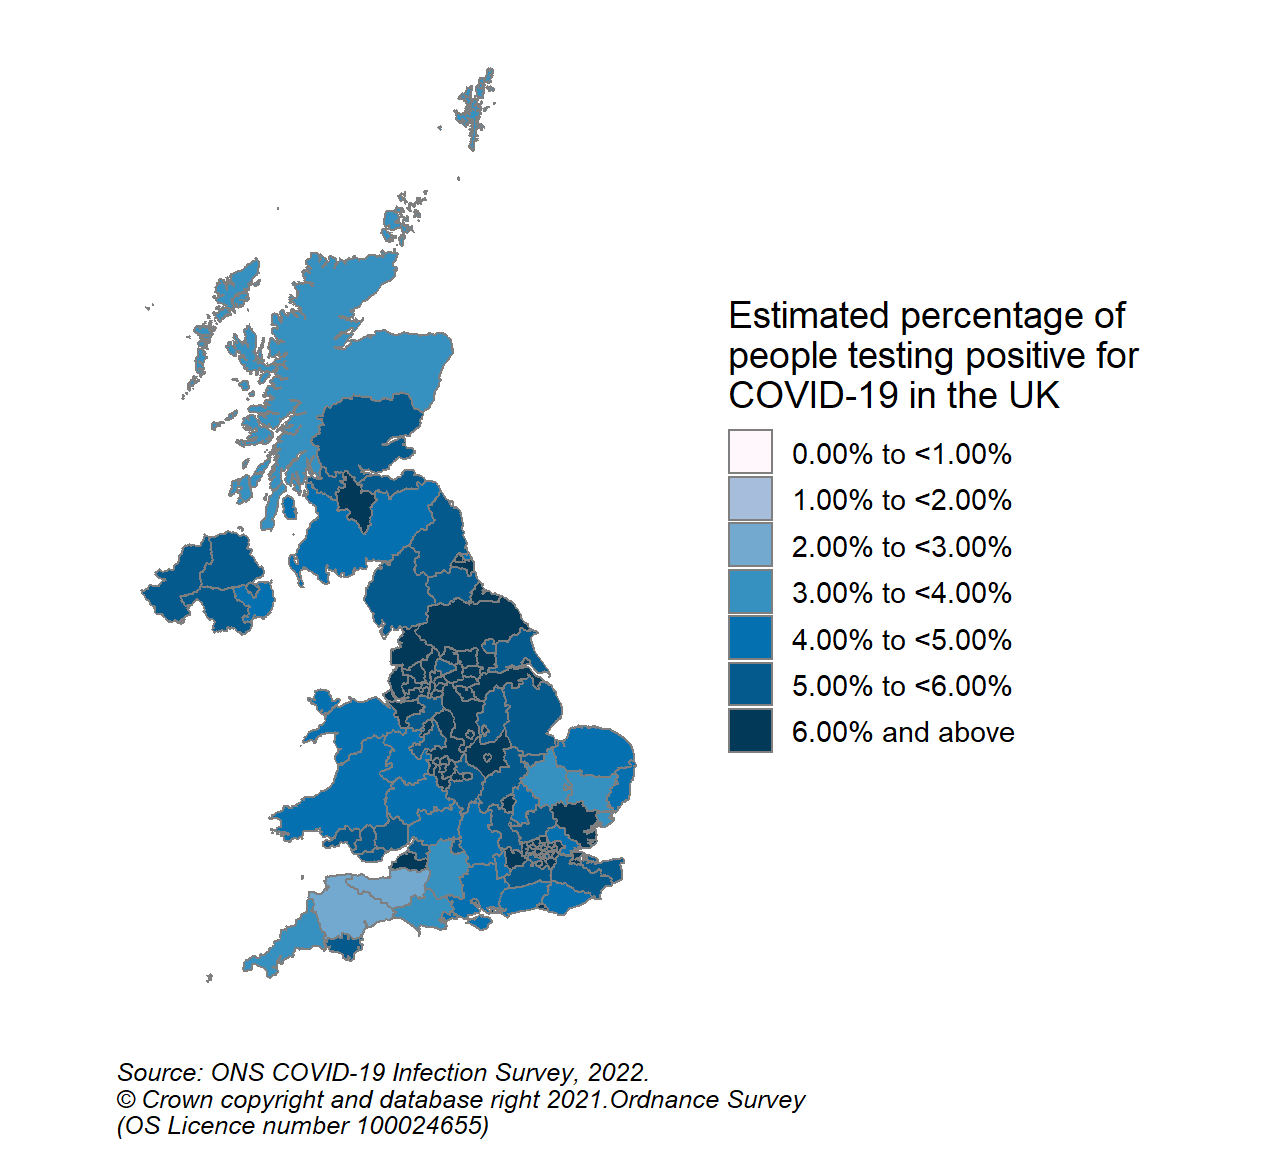 This colour coded map of the UK shows the modelled estimates of the percentage of the private residential population testing positive for COVID-19, by COVID-19 Infection Survey sub-regions. In Scotland, these sub-regions are comprised of Health Boards. The regions are: 123 - NHS Grampian, NHS Highland, NHS Orkney, NHS Shetland and NHS Western Isles, 124 - NHS Fife, NHS Forth Valley and NHS Tayside, 125 - NHS Greater Glasgow & Clyde, 126 - NHS Lothian, 127 - NHS Lanarkshire, 128 - NHS Ayrshire & Arran, NHS Borders and NHS Dumfries & Galloway.  The sub-region with the highest modelled estimate for the percentage of people testing positive was CIS Region 127 (NHS Lanarkshire) at 6.96% (95% credible interval: 5.79% to 8.39%).  The sub-region with the lowest modelled estimate was Region 123 (NHS Grampian, NHS Highland, NHS Orkney, NHS Shetland and NHS Western Isles), at 3.95% (95% credible interval: 3.25% to 4.85%).